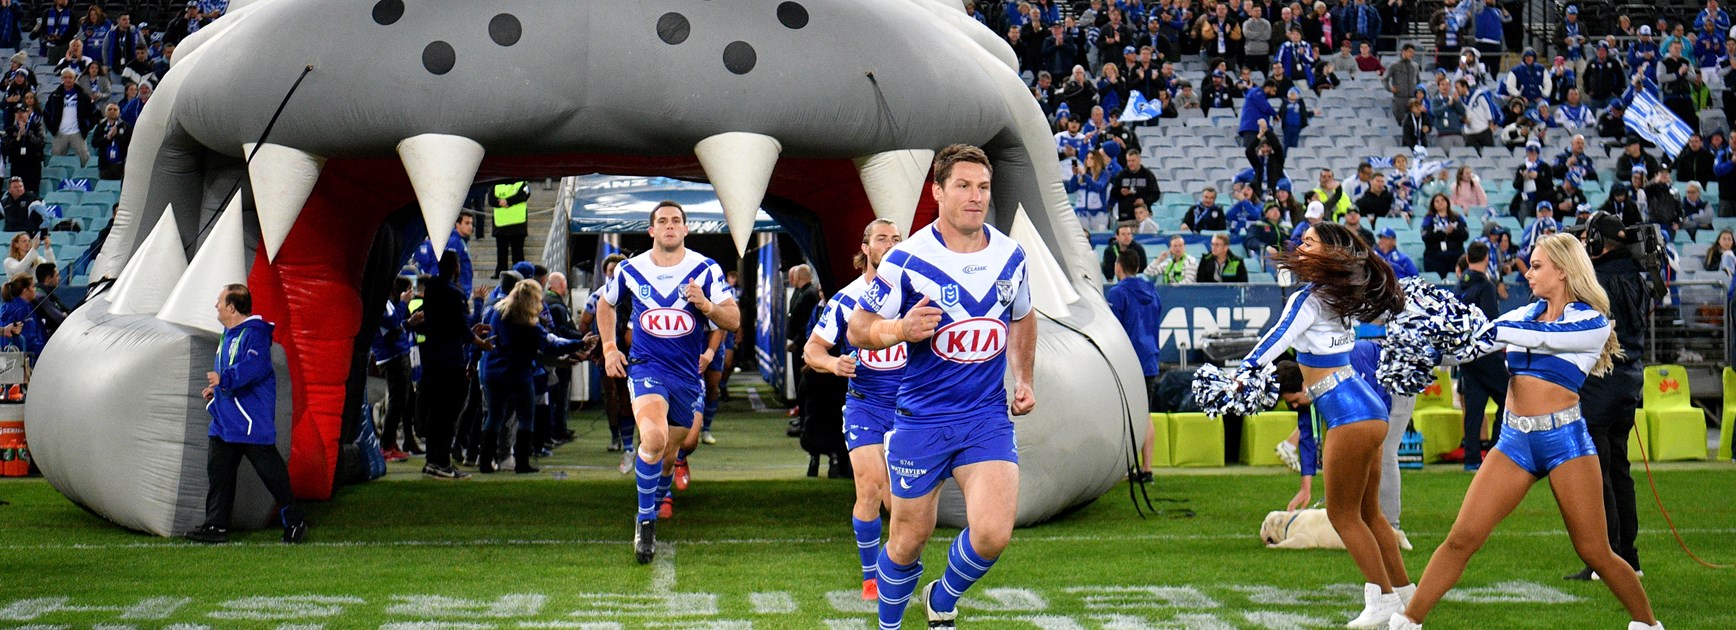 Bulldogs to move games to Bankwest Stadium and Perth